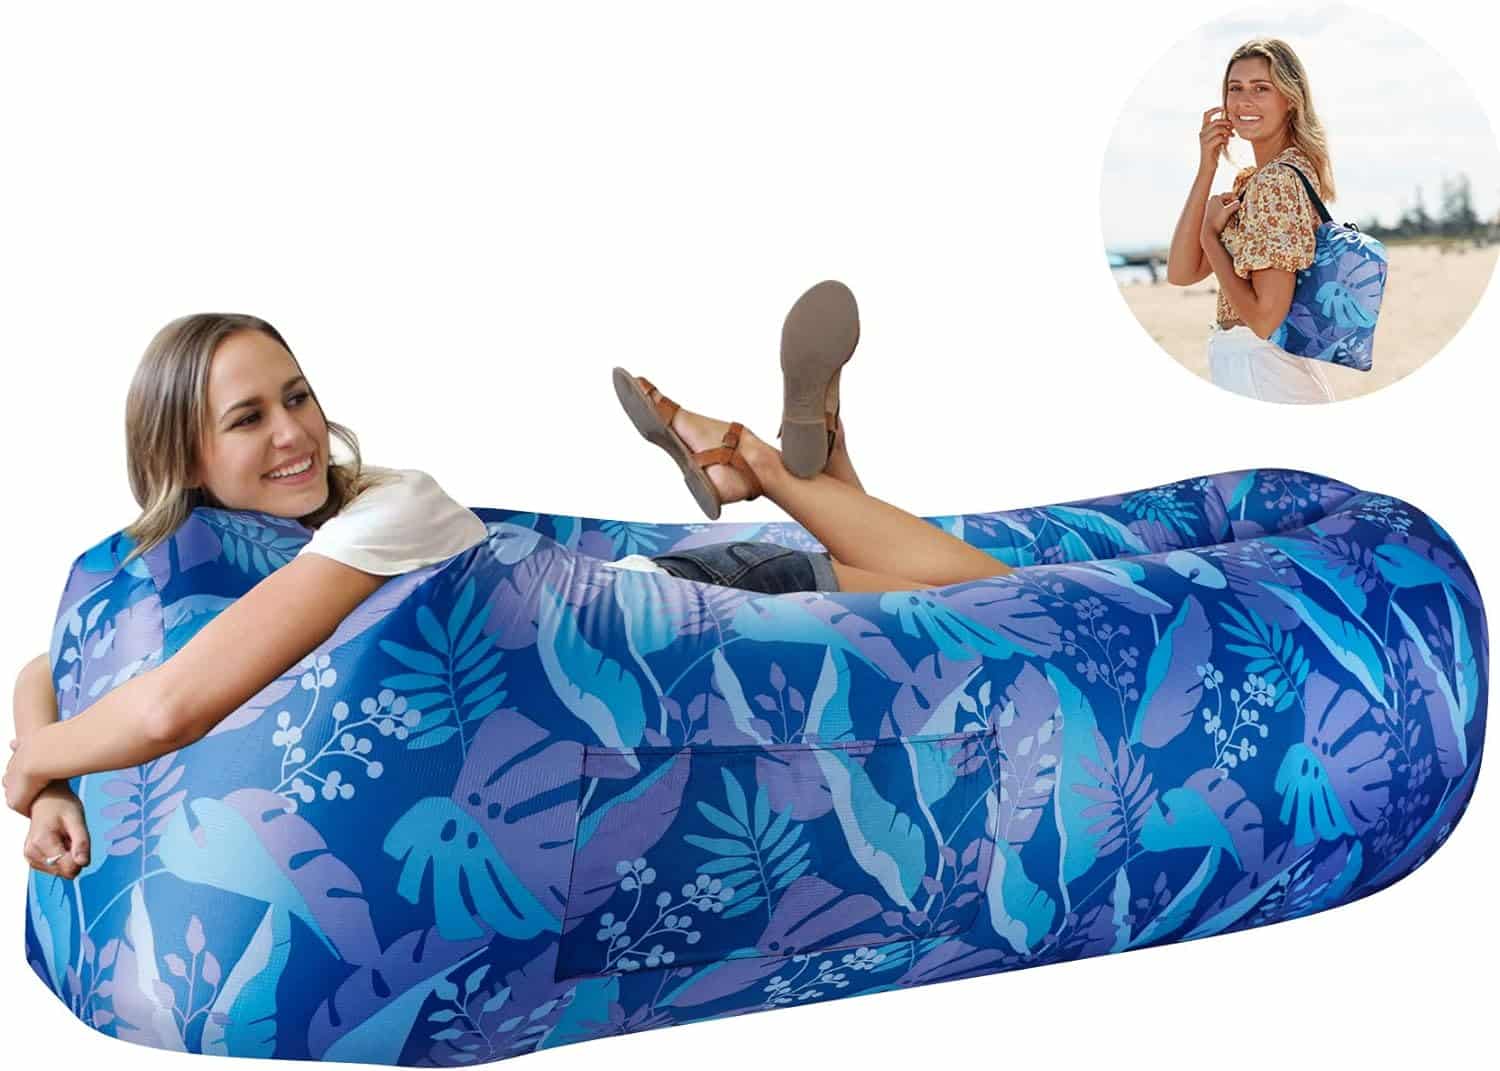 A picture of a smiling woman laying on an inflatable hammock